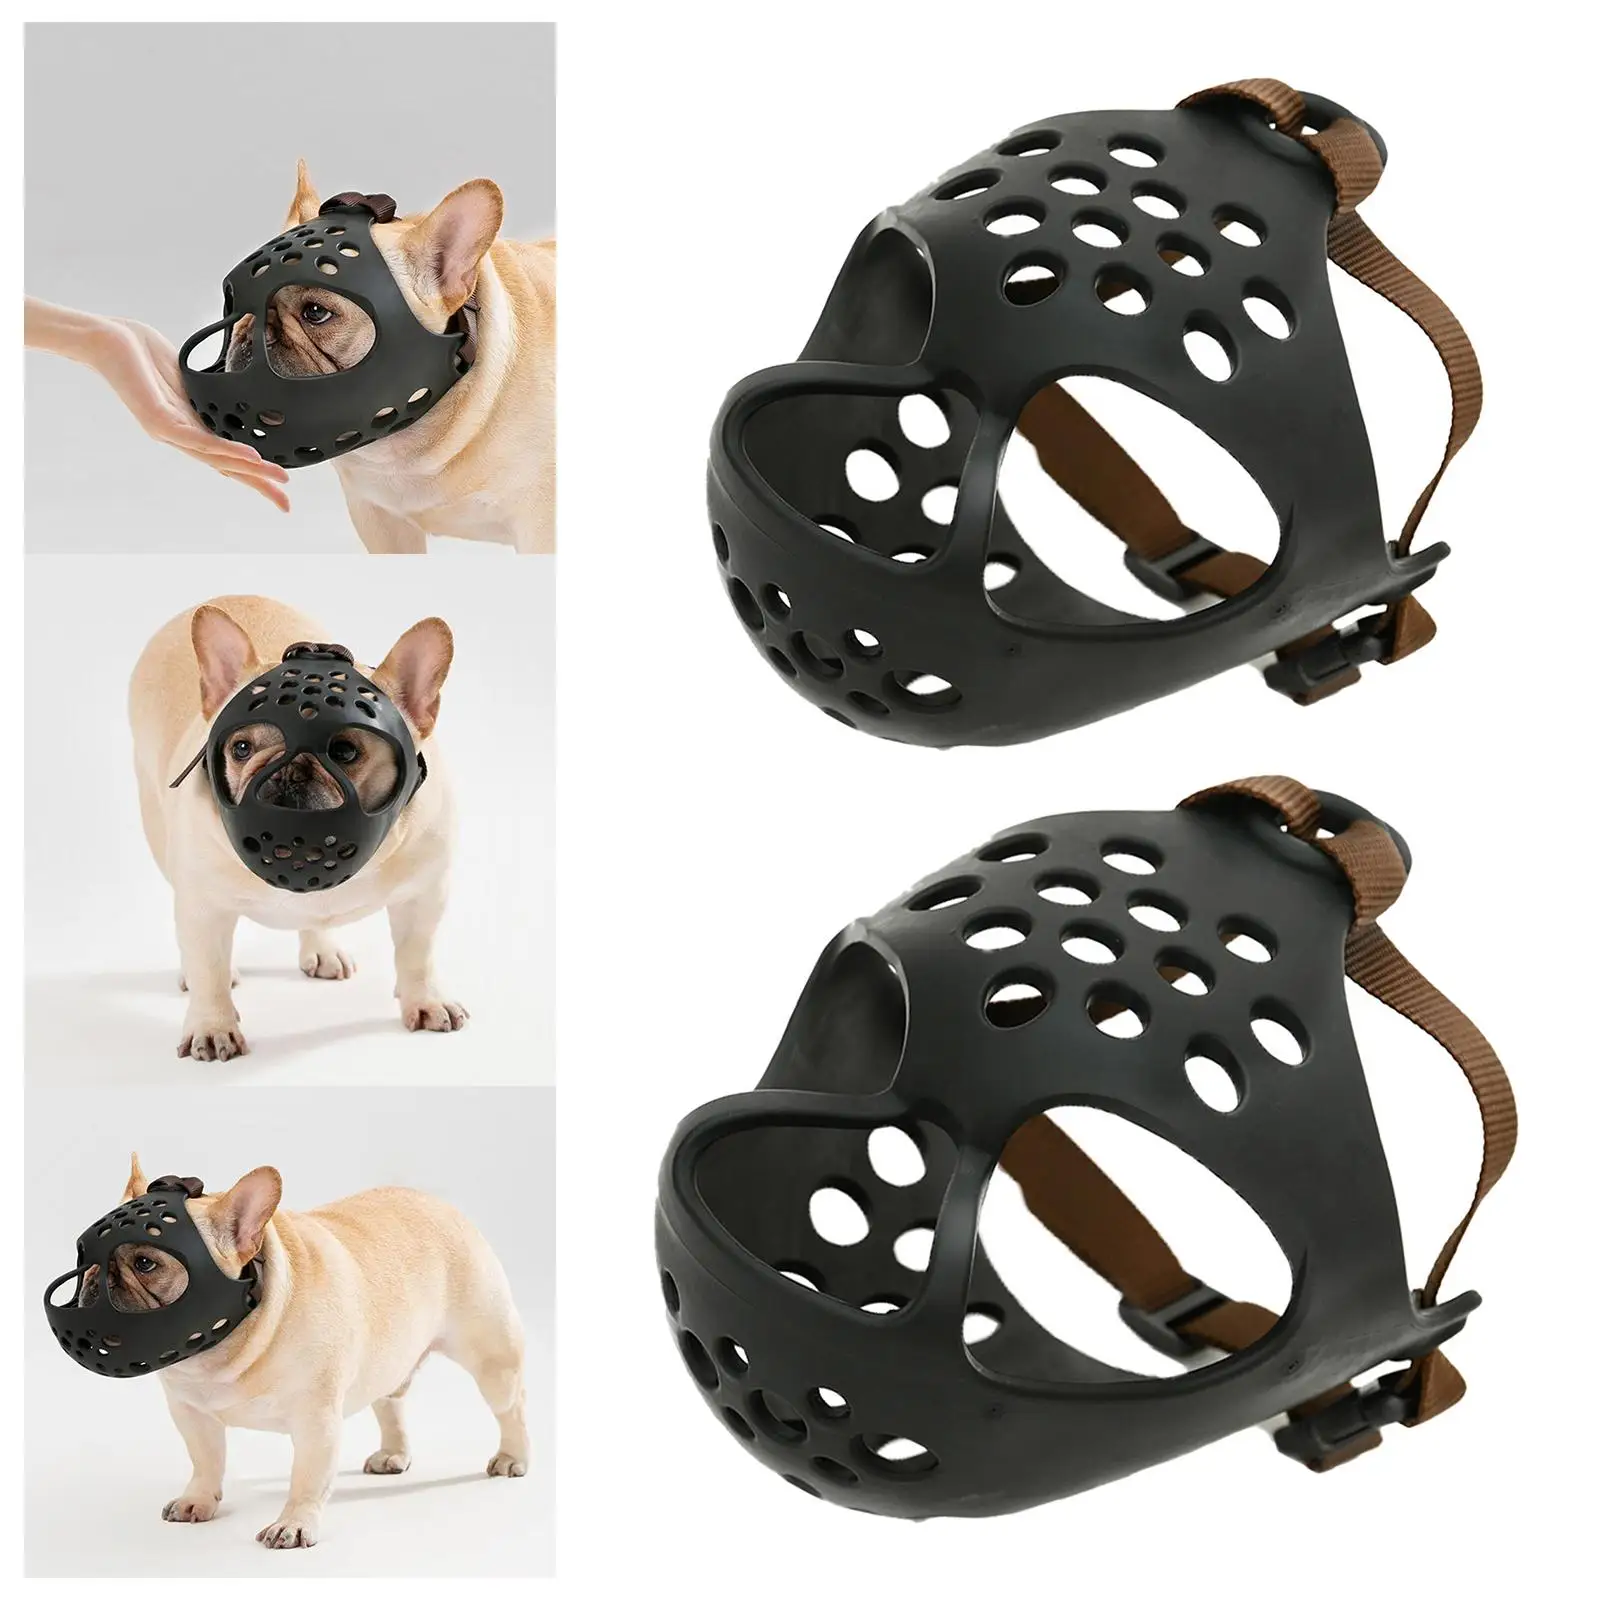 Short Snout, Soft Flat Faced Muzzle for dog for Biting Chewing Licking and Grooming